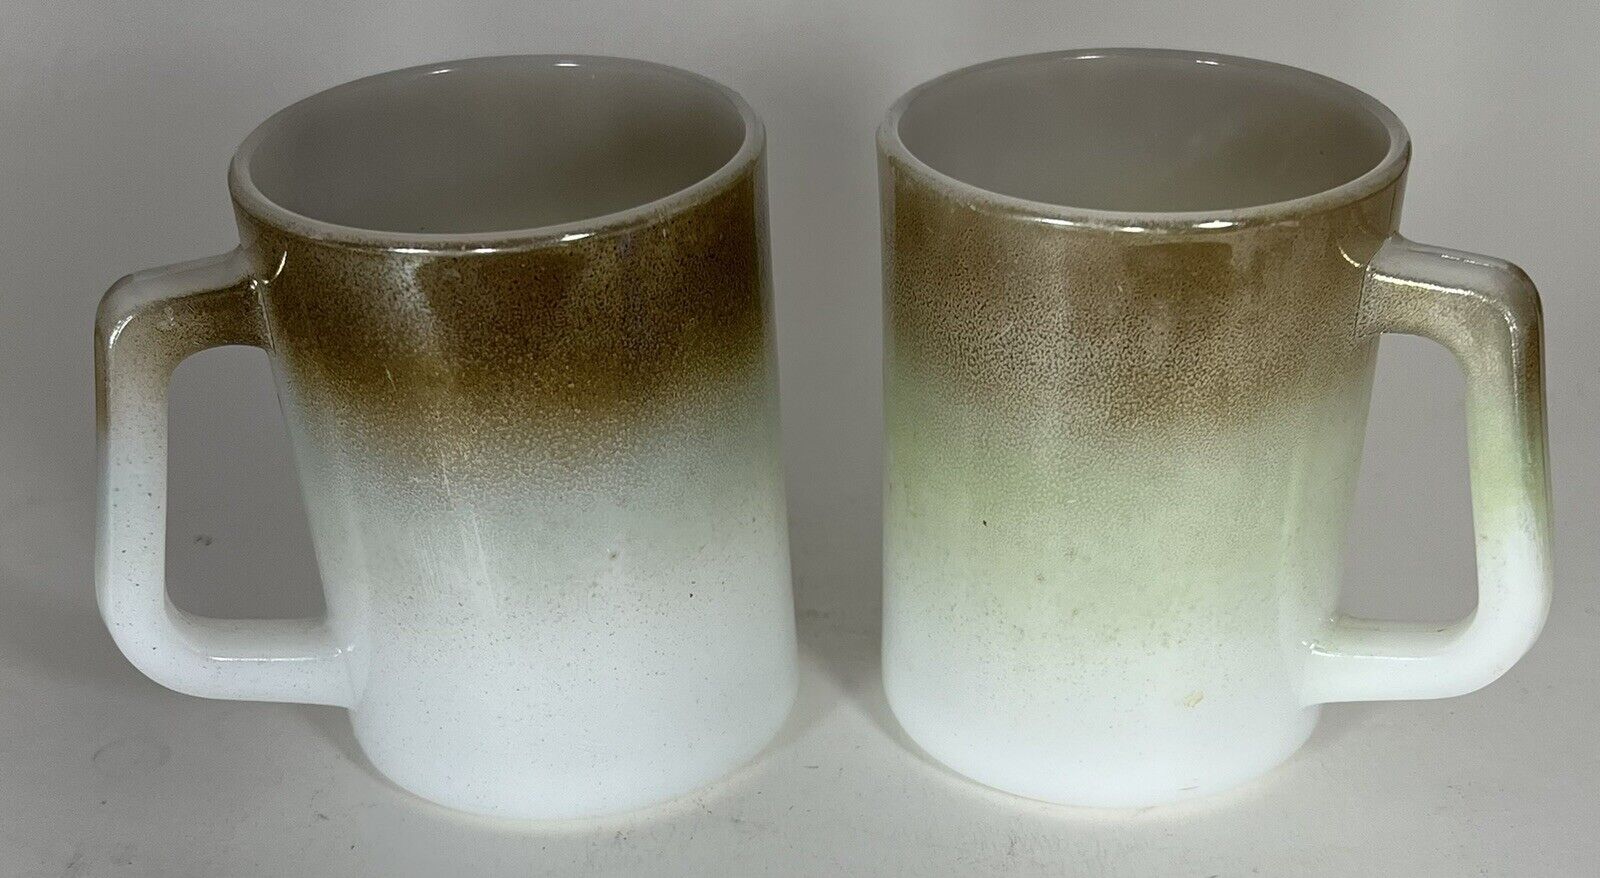 2 Retro Federal Glass HEAT PROOF Mugs Brown - White Coffee Cup Vintage